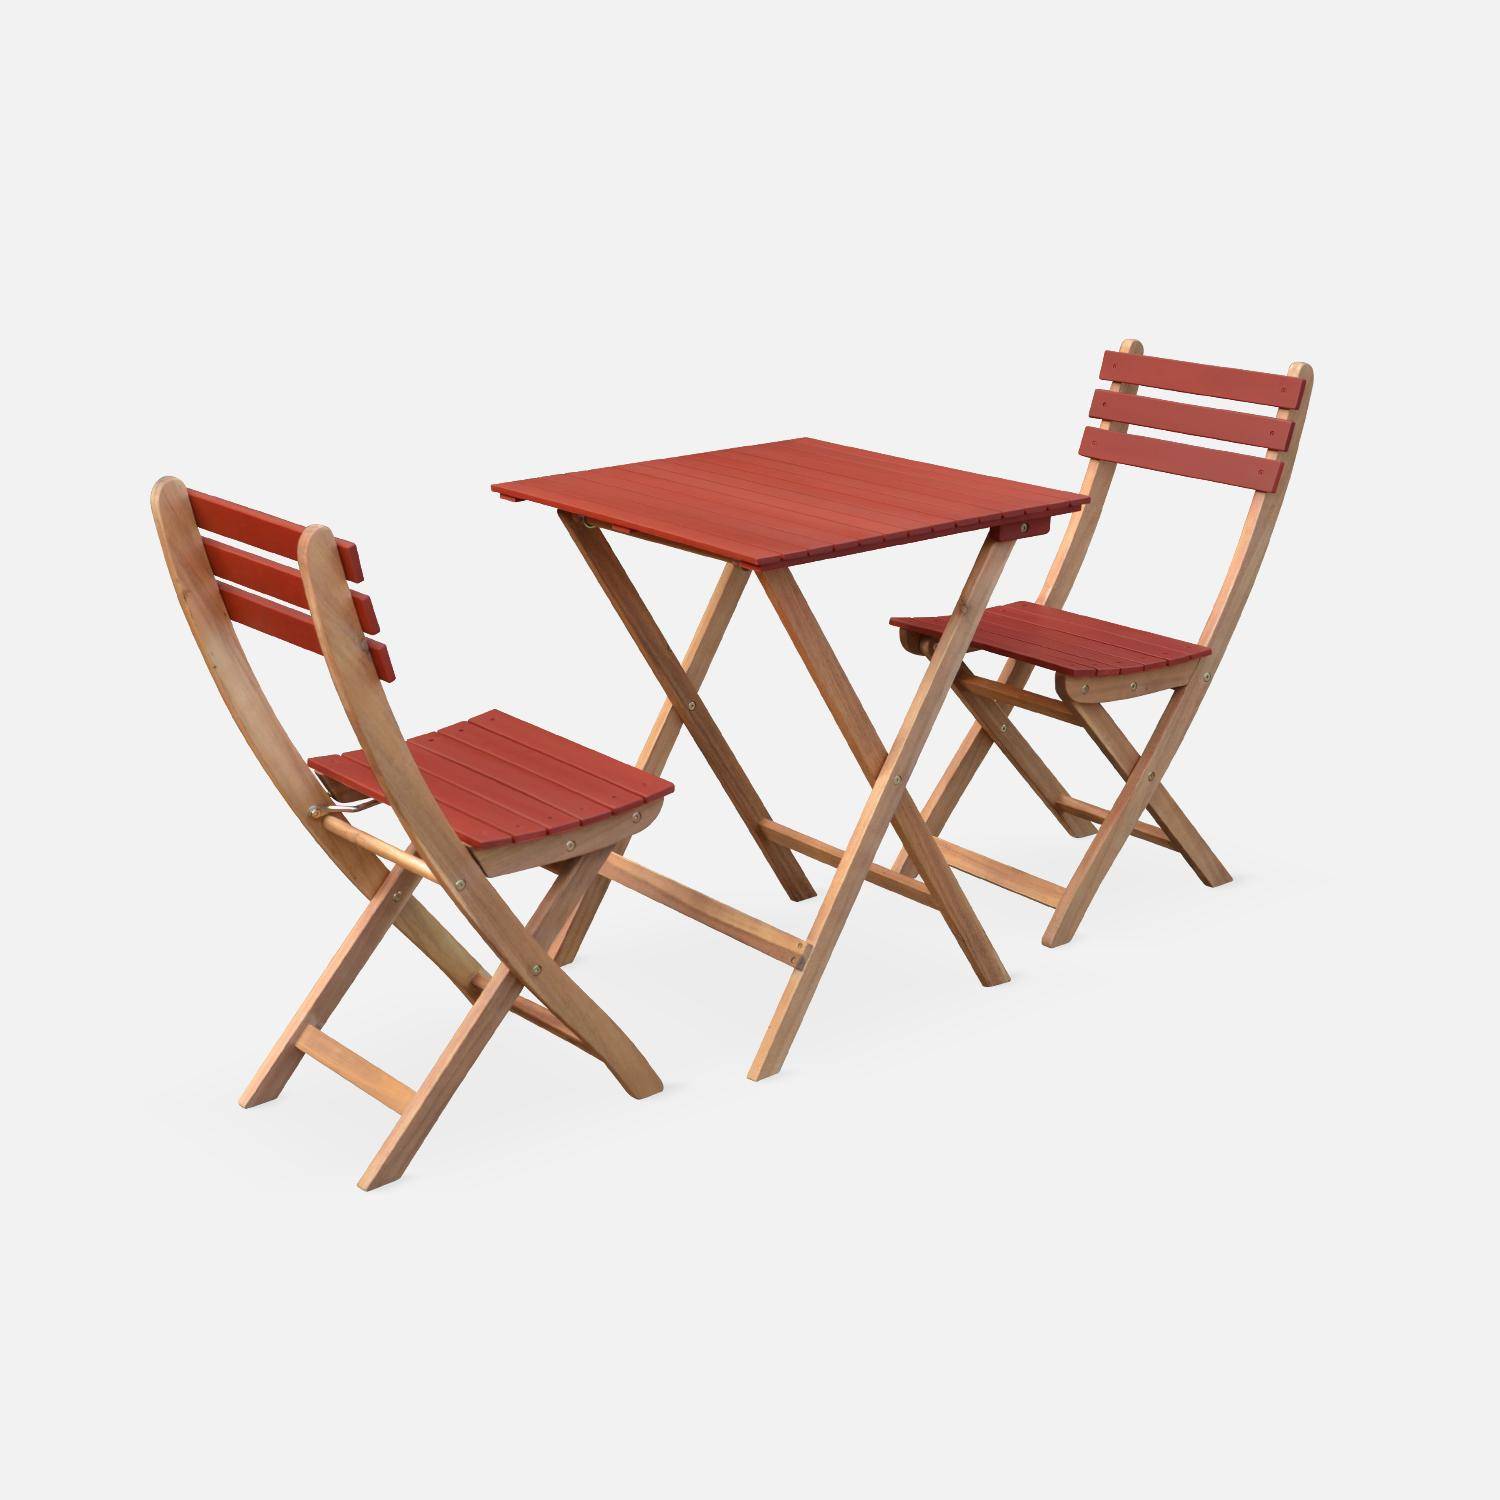 2-seater foldable wooden bistro garden table with chairs, 60x60cm - Barcelona - Terracotta Photo4